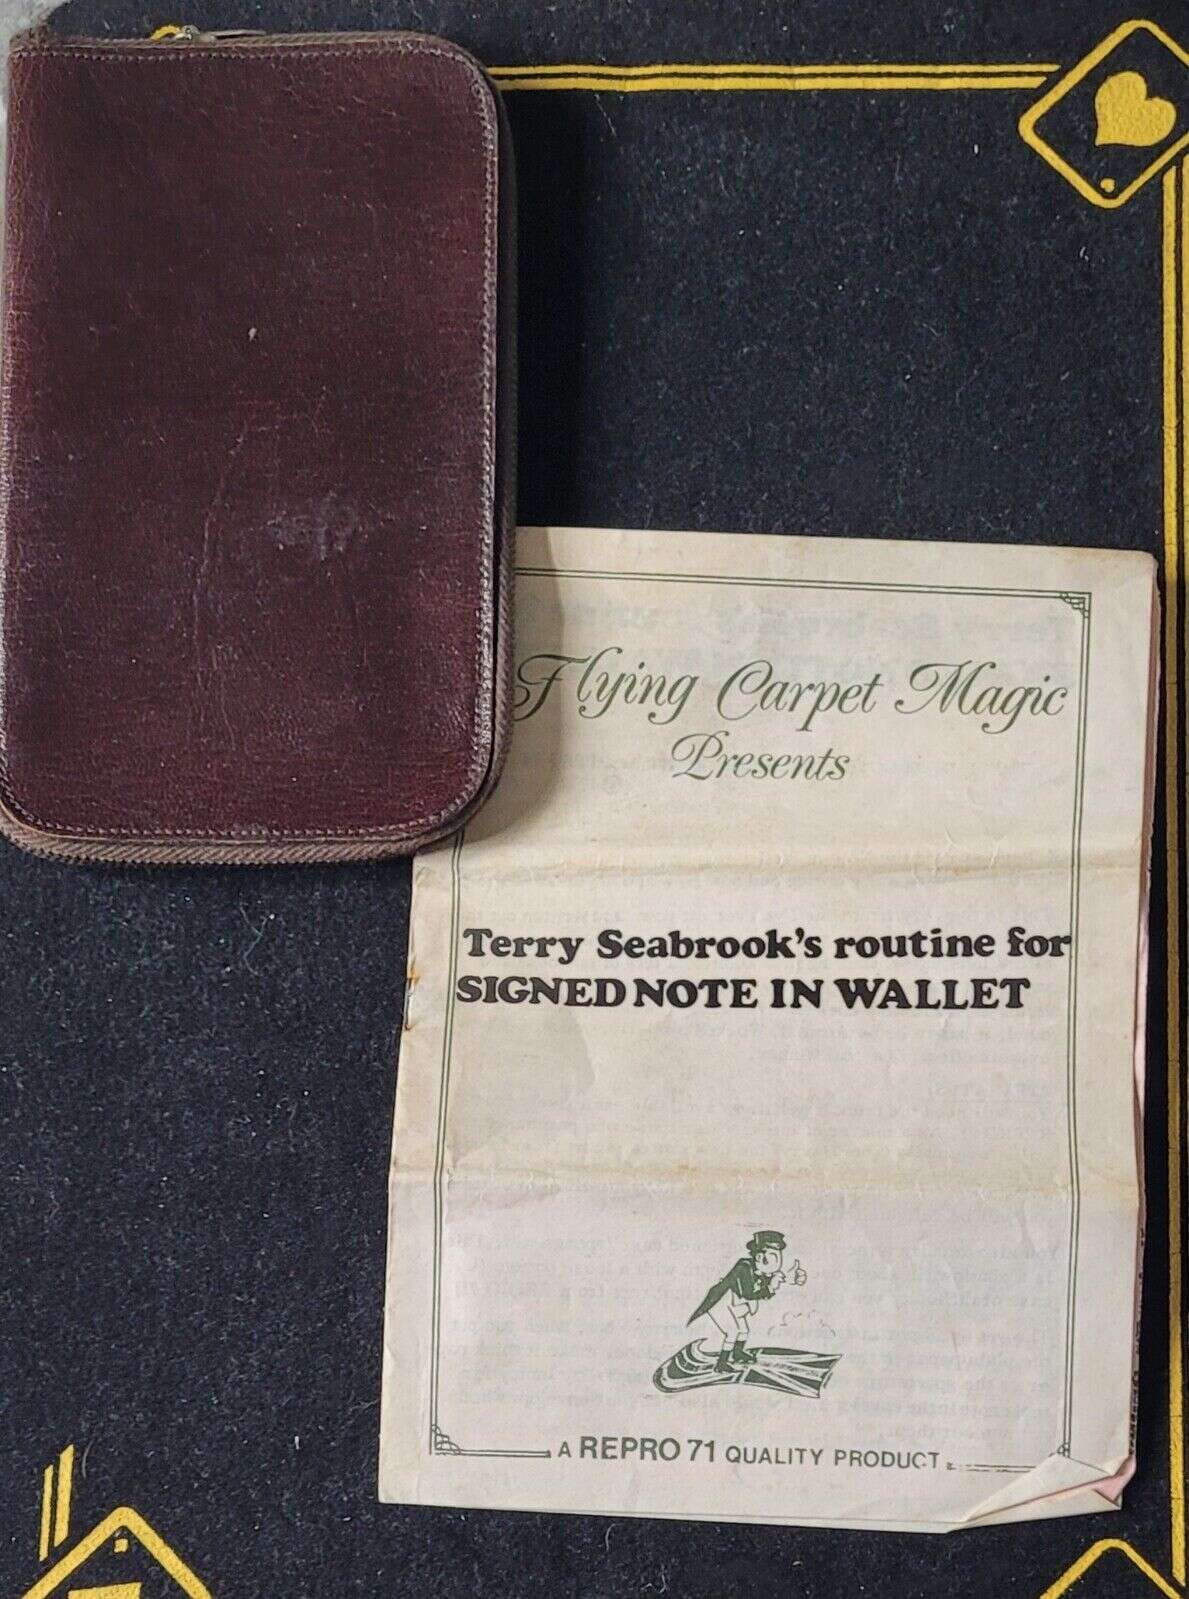 Terry Seabrooke Signed Note In Wallet shown on closeup pad with instructions